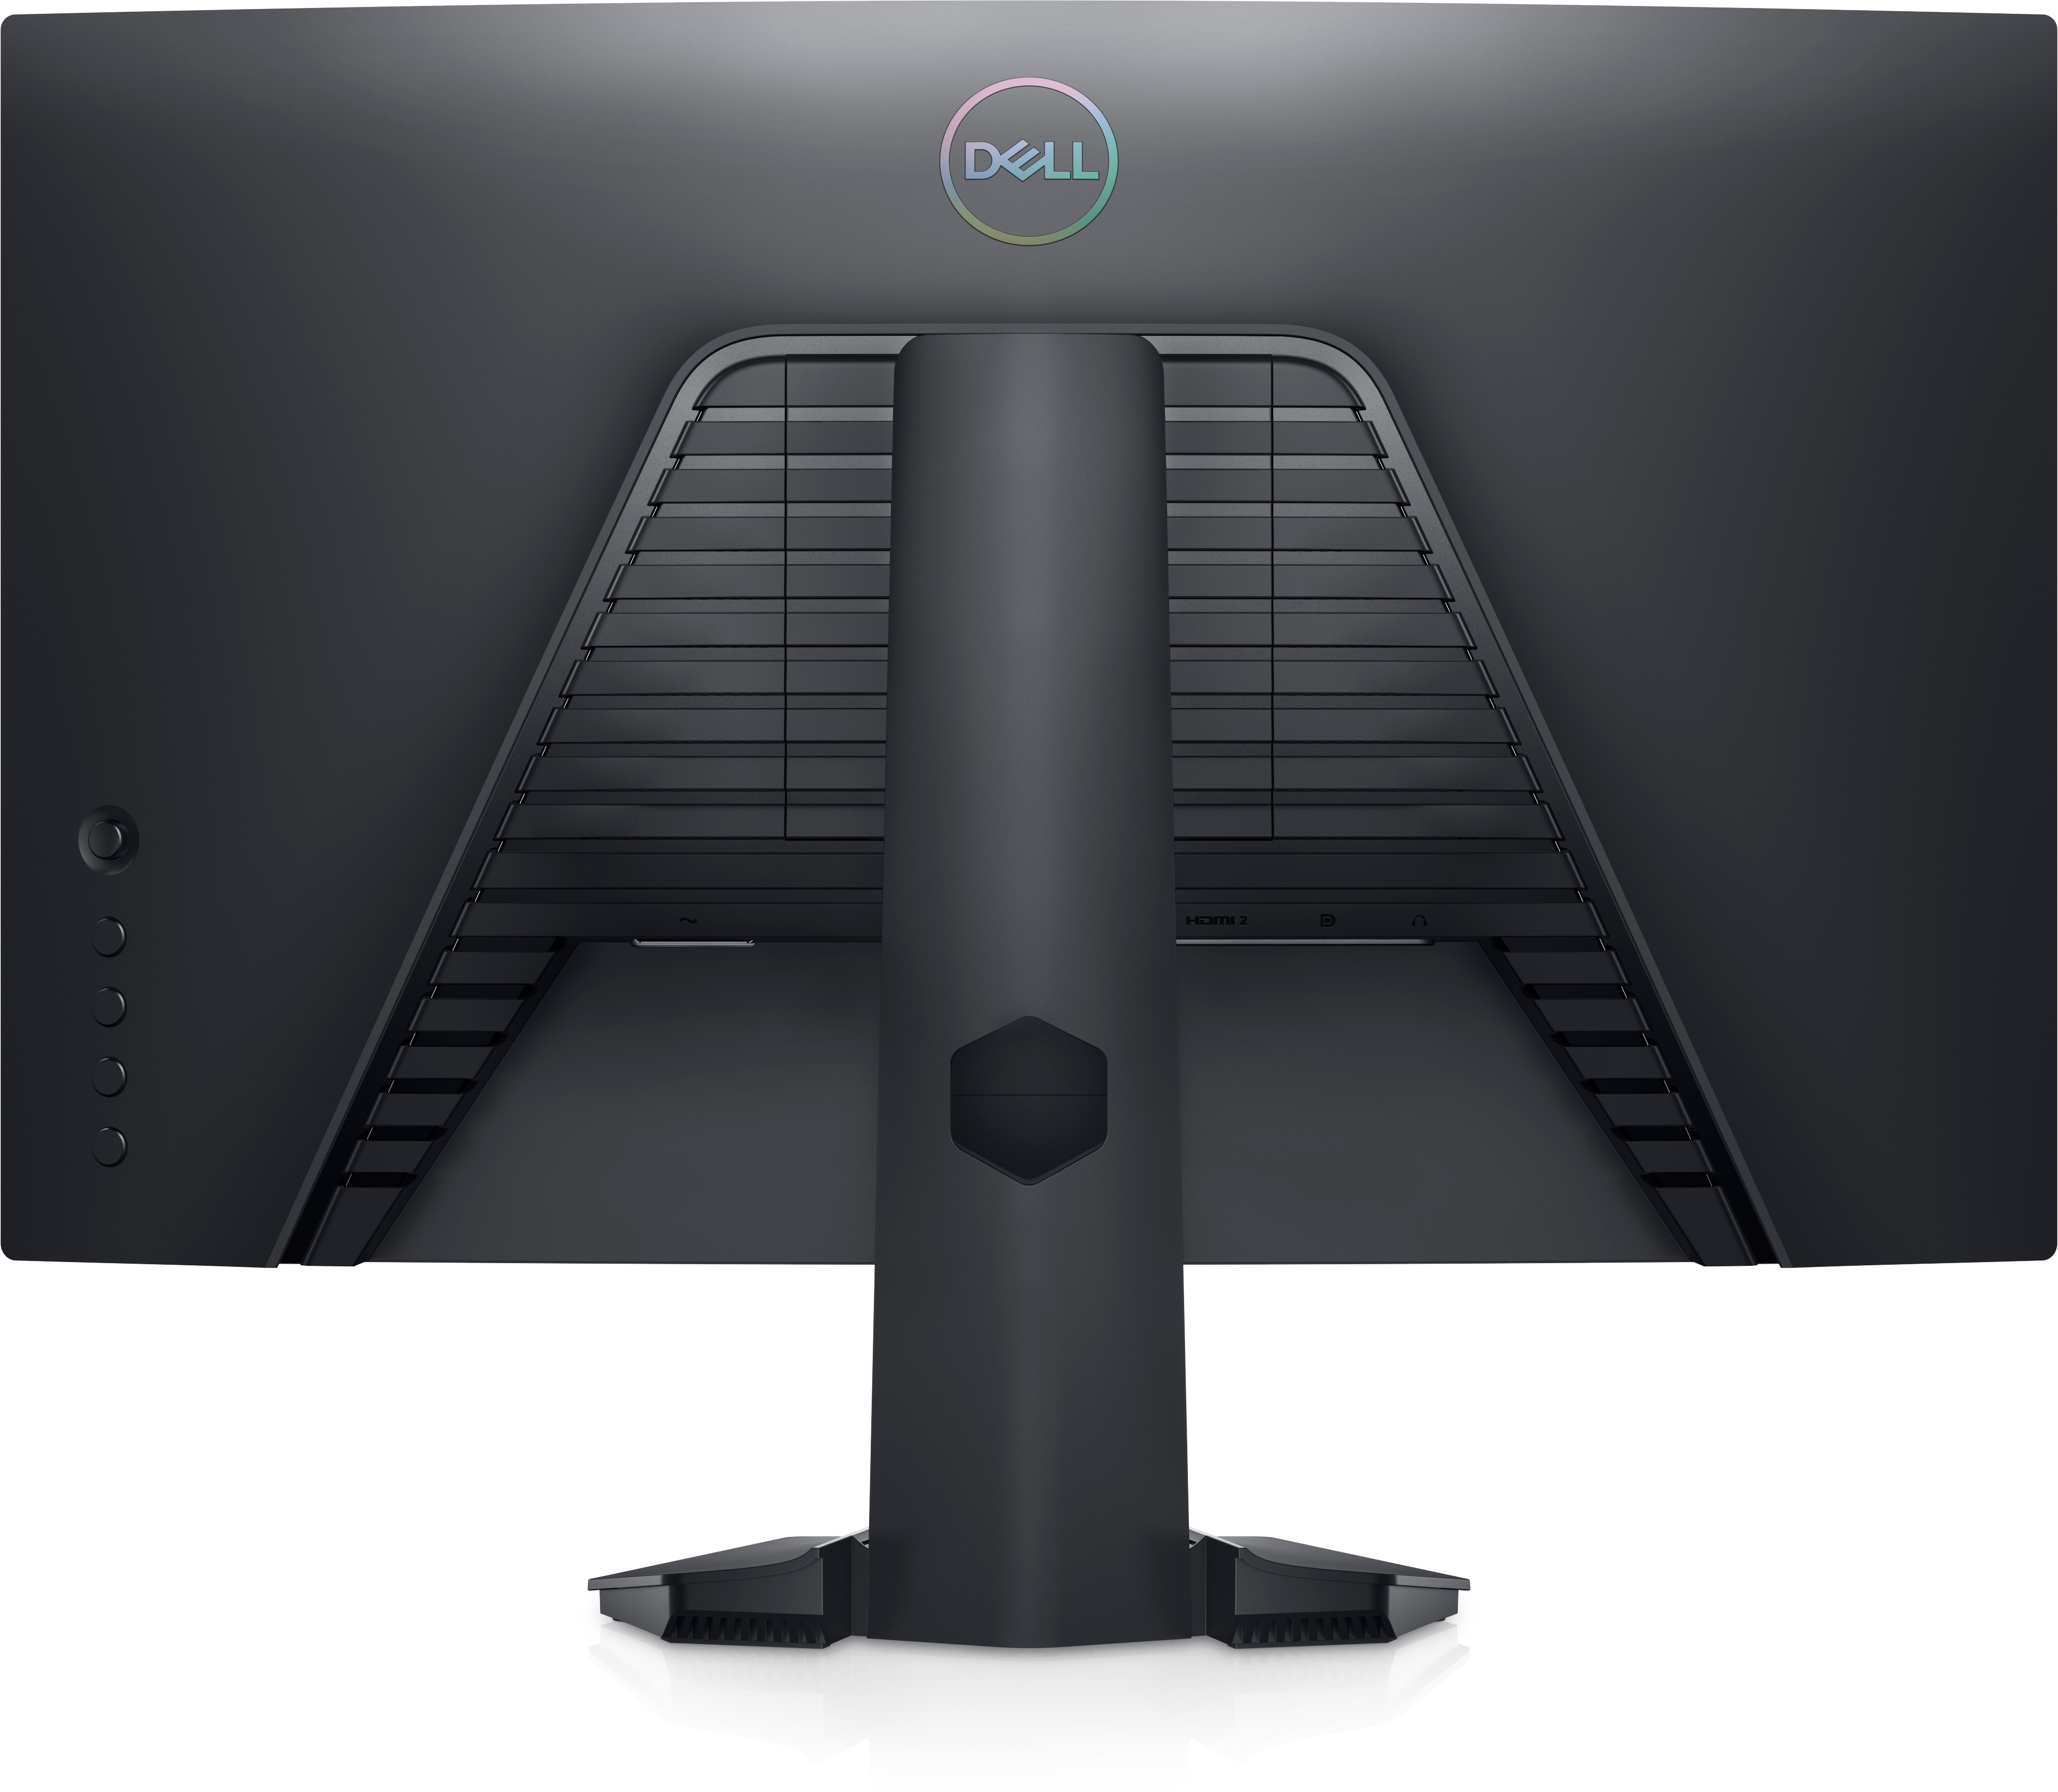 Dell 24-Inch FHD Curved Gaming Monitor - S2422HG | Dell USA